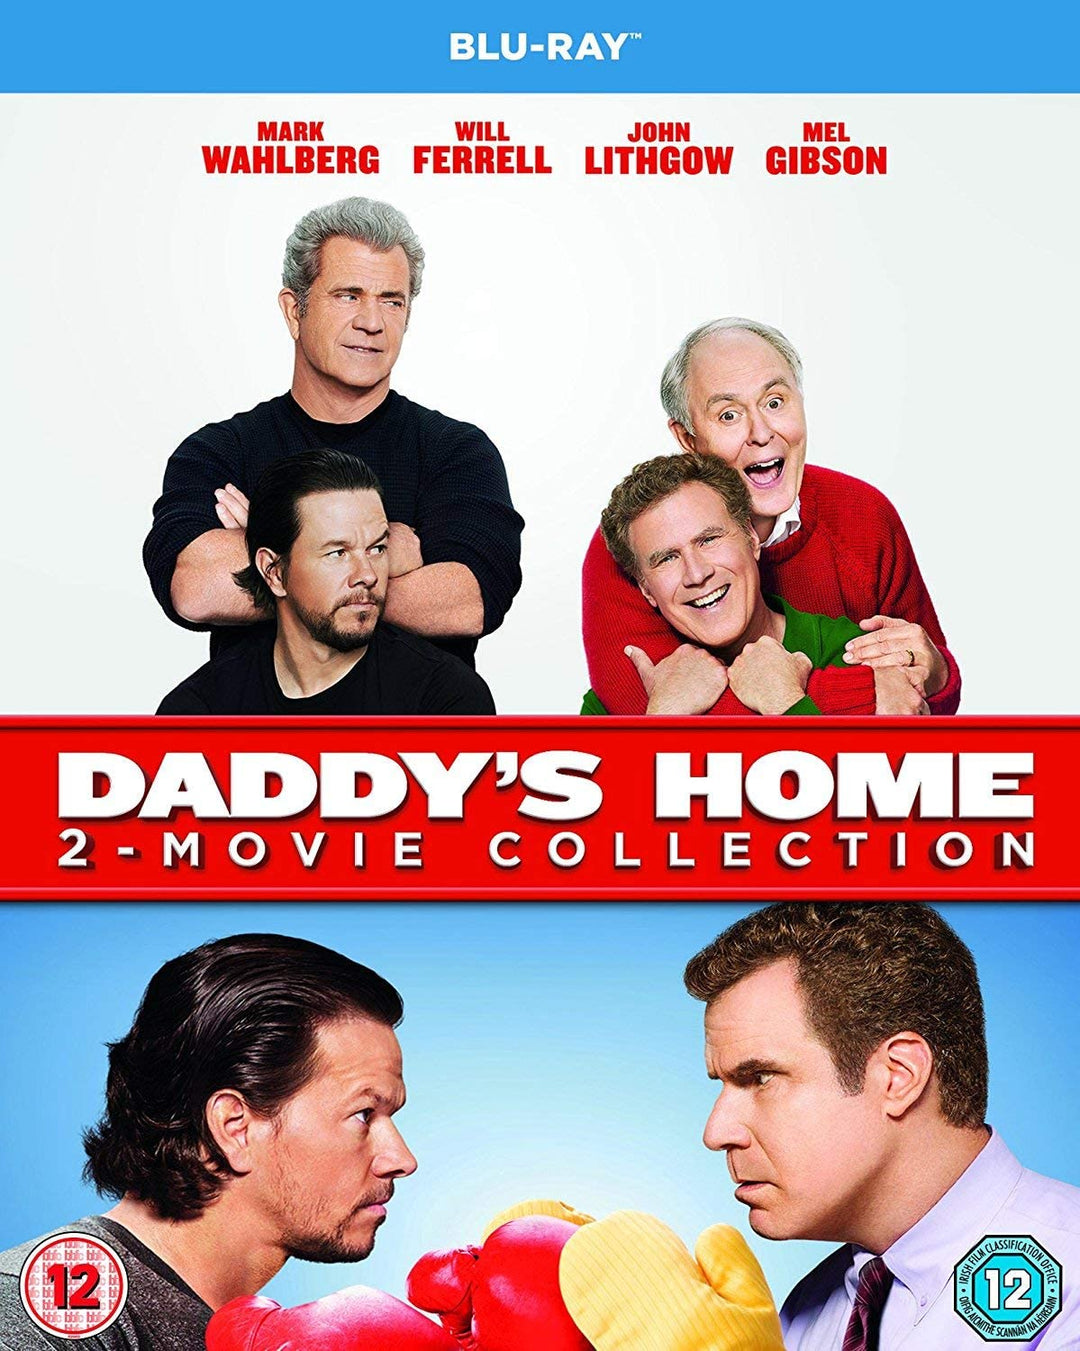 Daddy's Home: 2-Movie Collection - Comedy/Family [Blu-Ray]